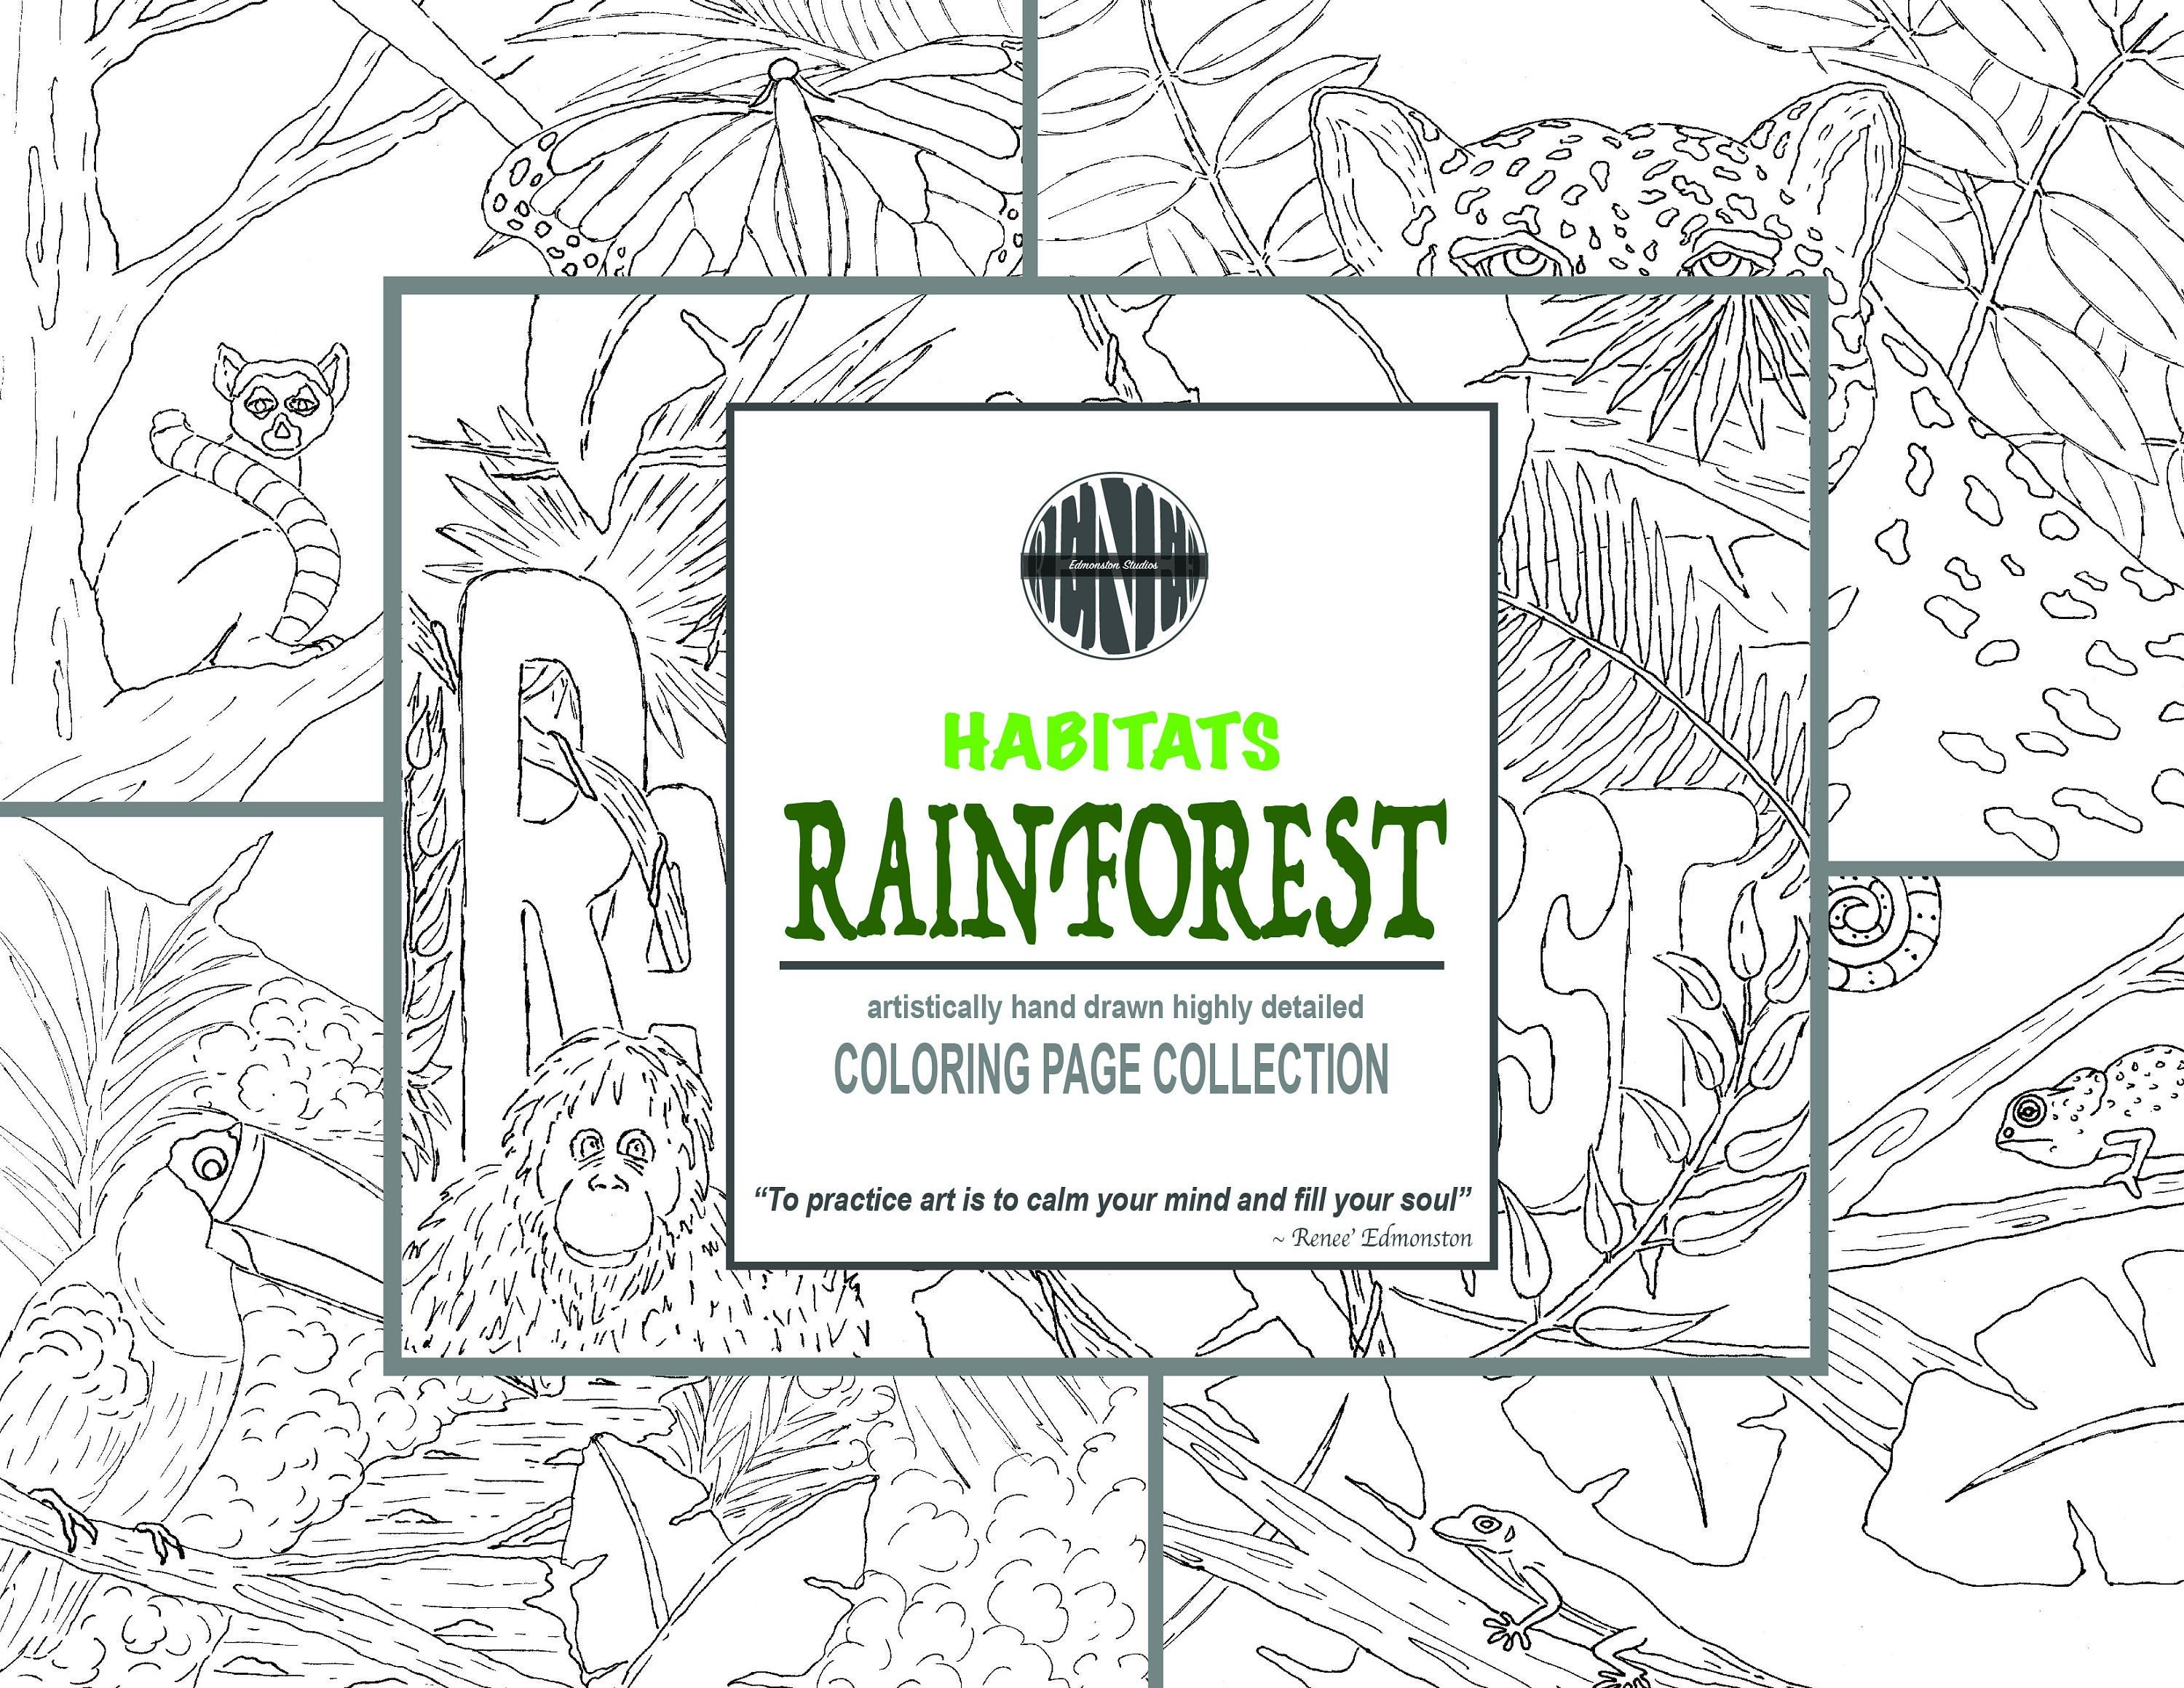 Rainforest habitat coloring pages coloring sheets printable hand illustrated instant download